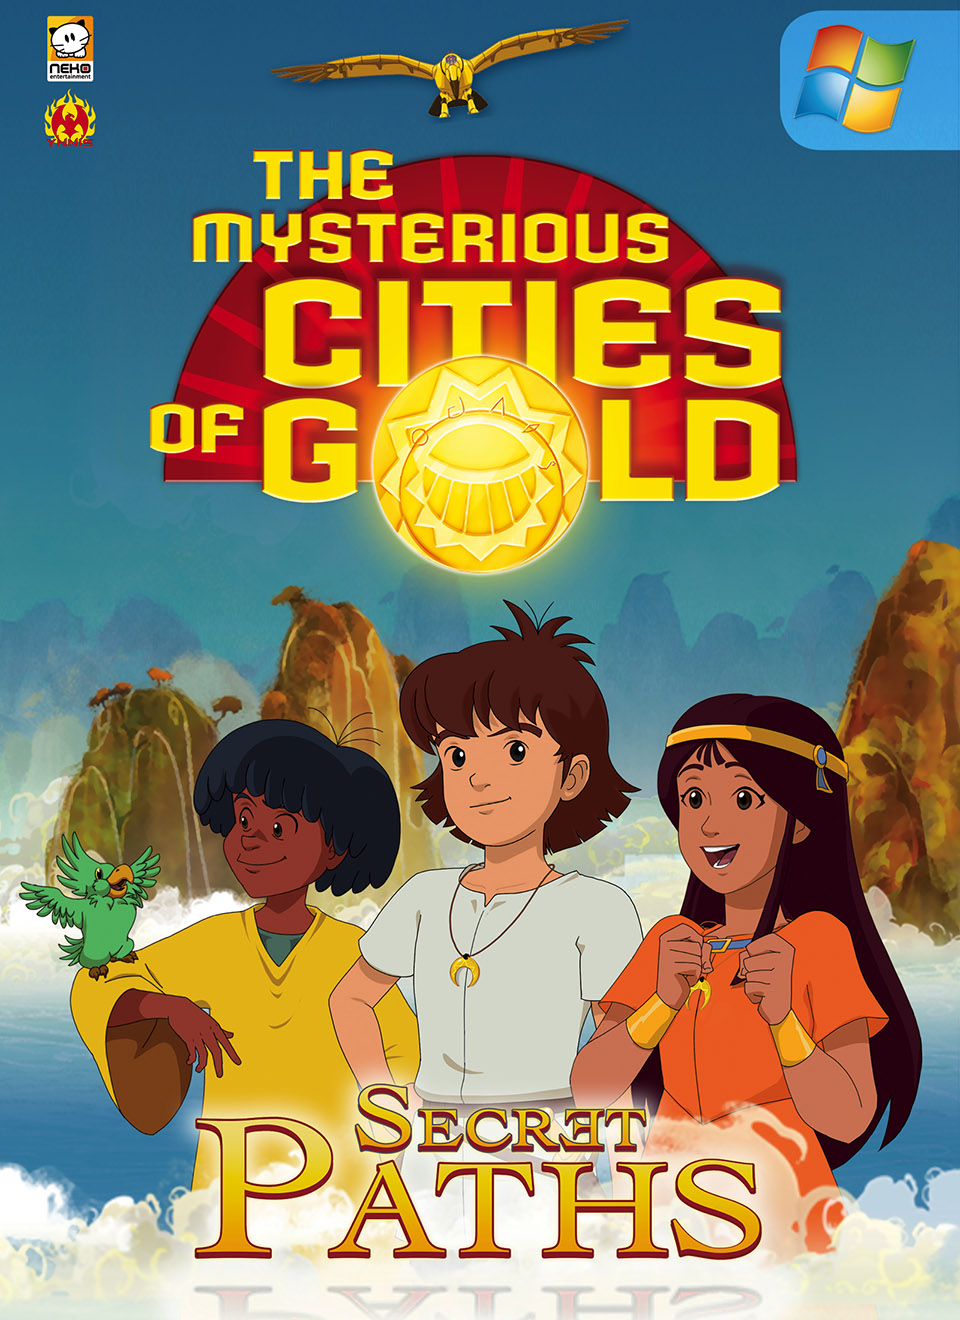 MYSTERIOUS CITIES OF GOLD Opener 